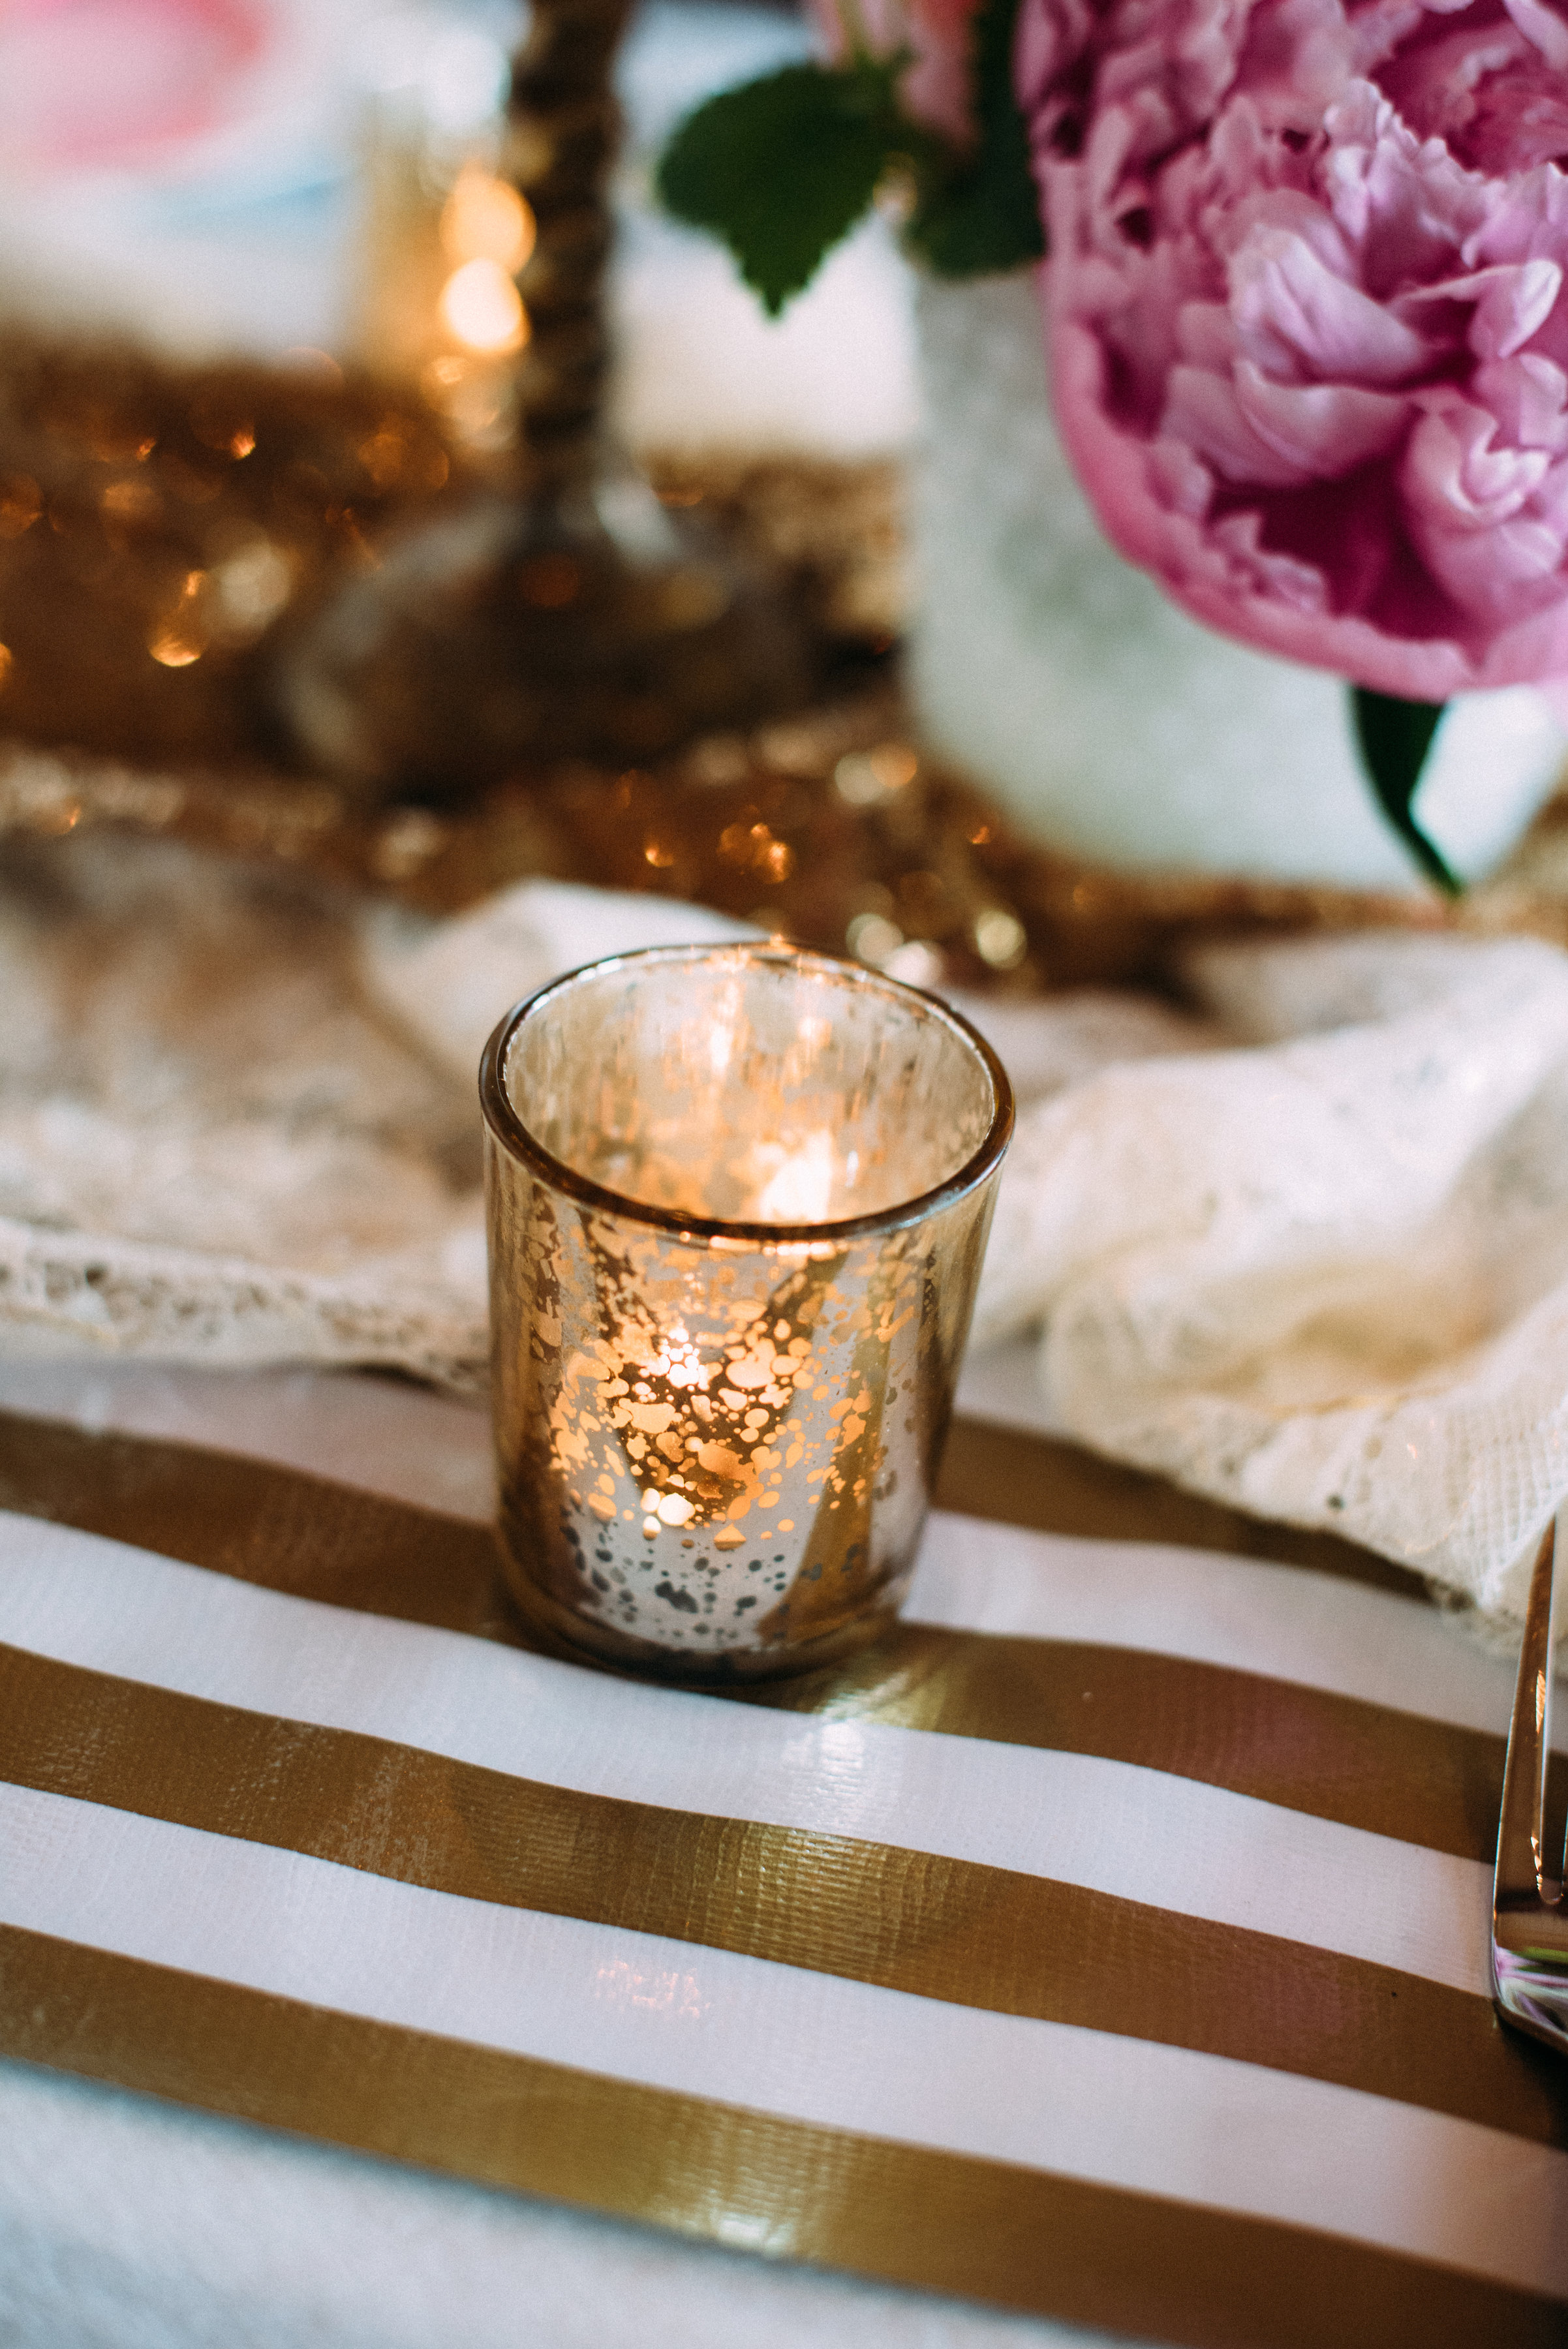  Create loose groupings of threes down the table, pairing flowers, candles and decor together. 